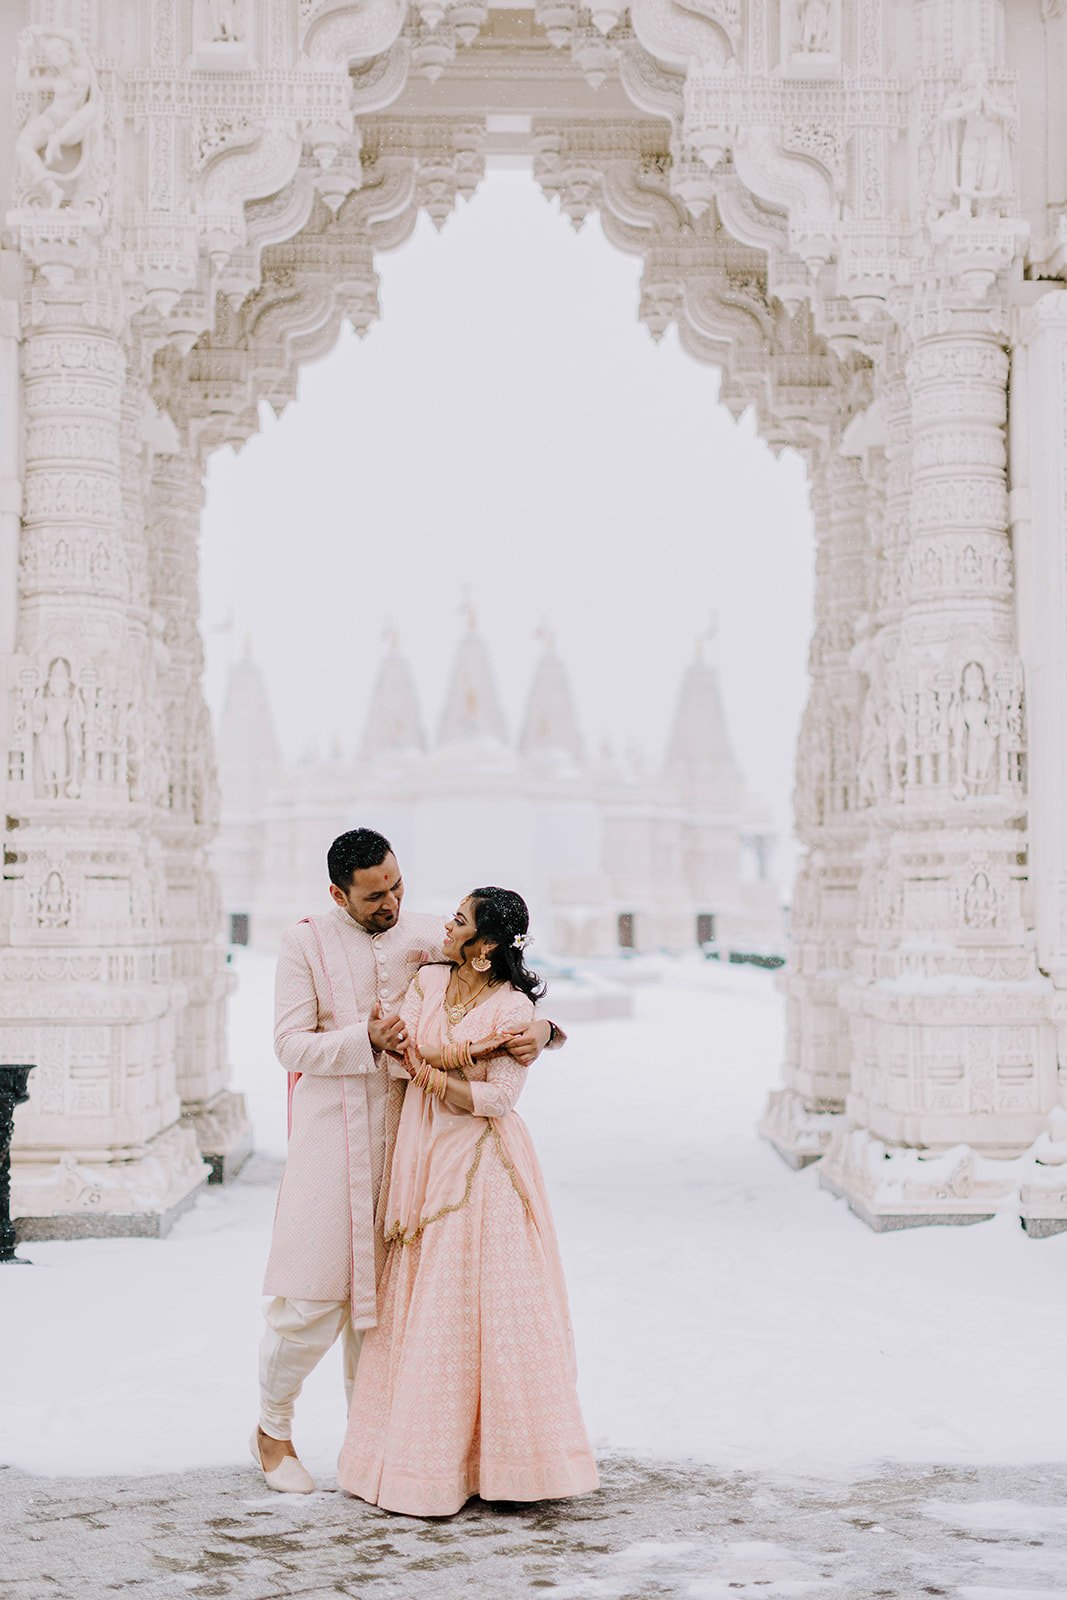 Newlywed couple embrace in front of snow covered  Hindu temple